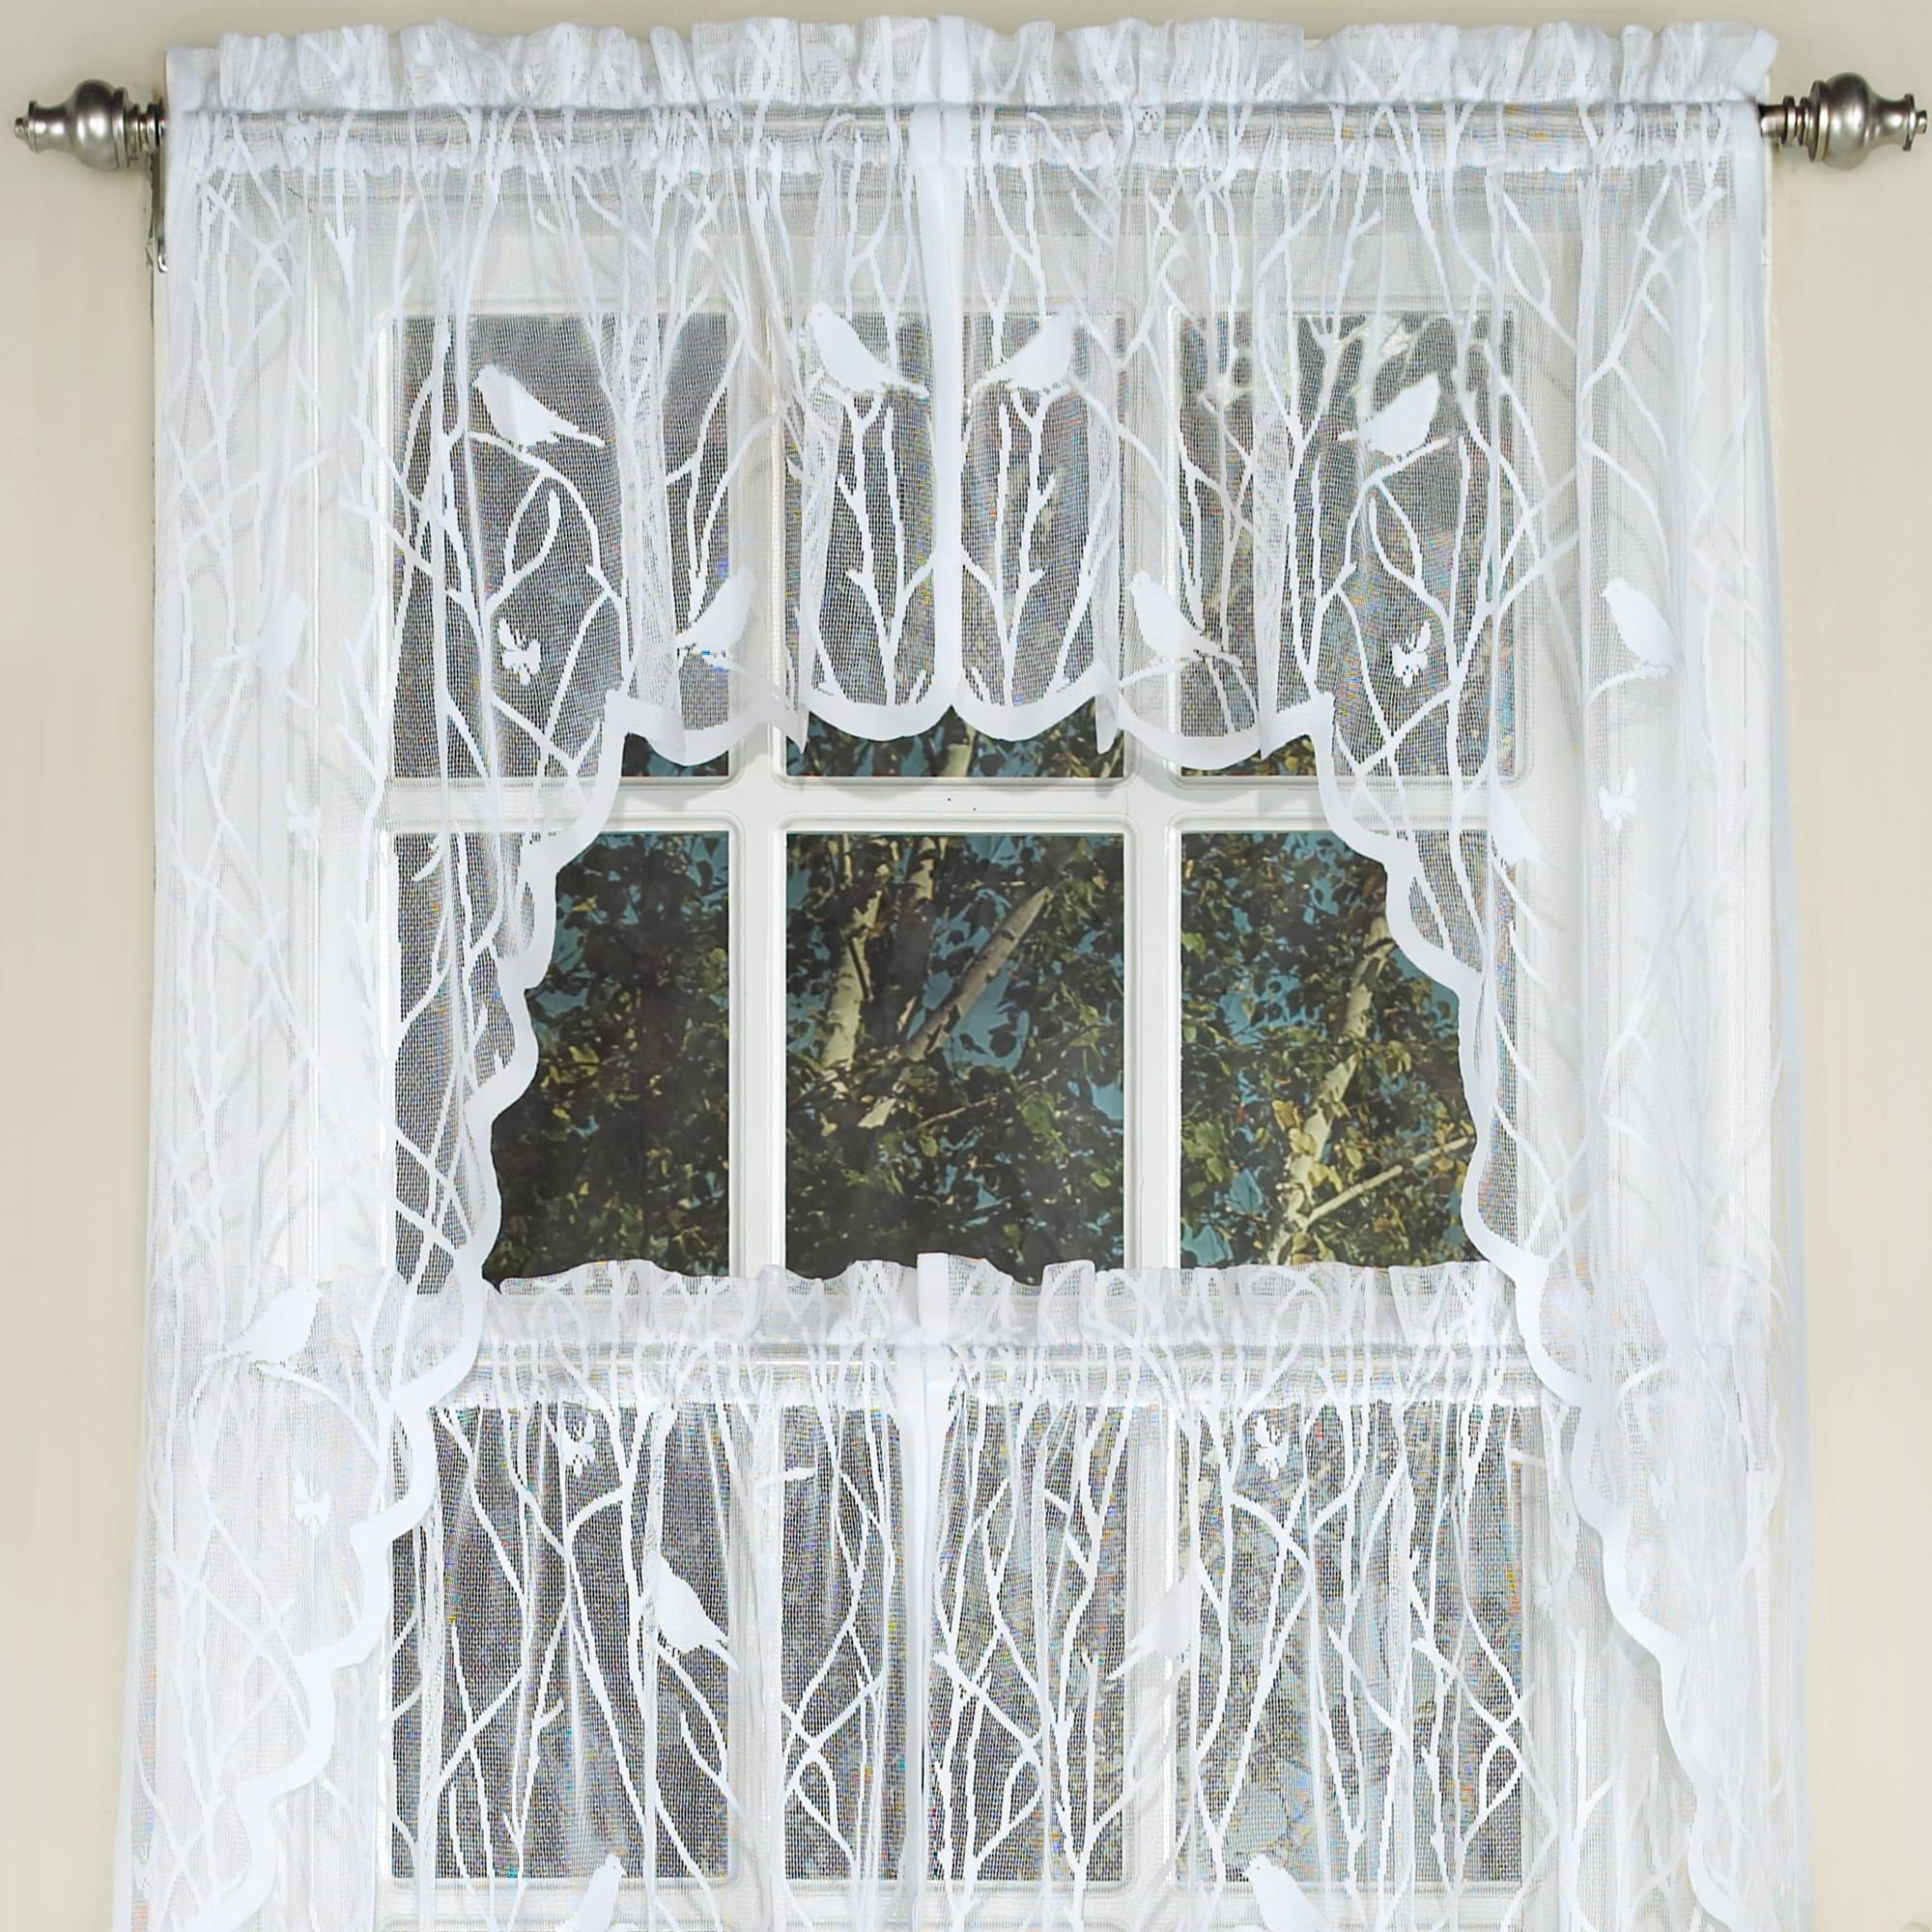 Sweet Home Collection White Polyester Knit Lace Bird Motif Pertaining To White Knit Lace Bird Motif Window Curtain Tiers (View 2 of 20)